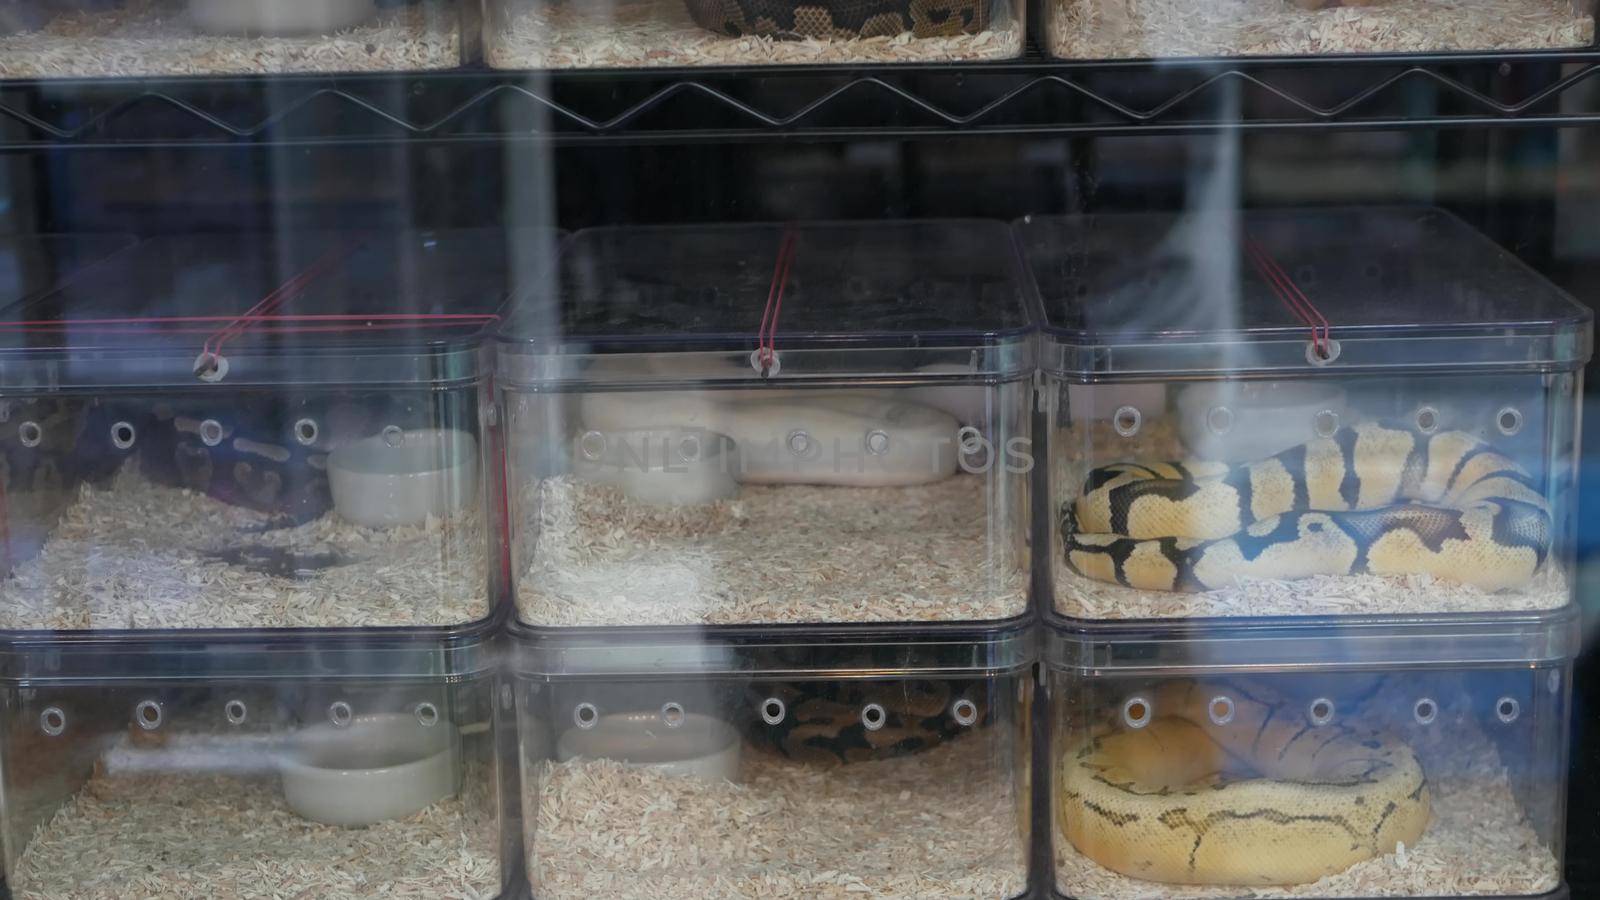 Captive bred snakes for sale. Small plastic boxes with captive bred ball pythons of various morphs placed on stall on Chatuchak Market in Bangkok, Thailand.